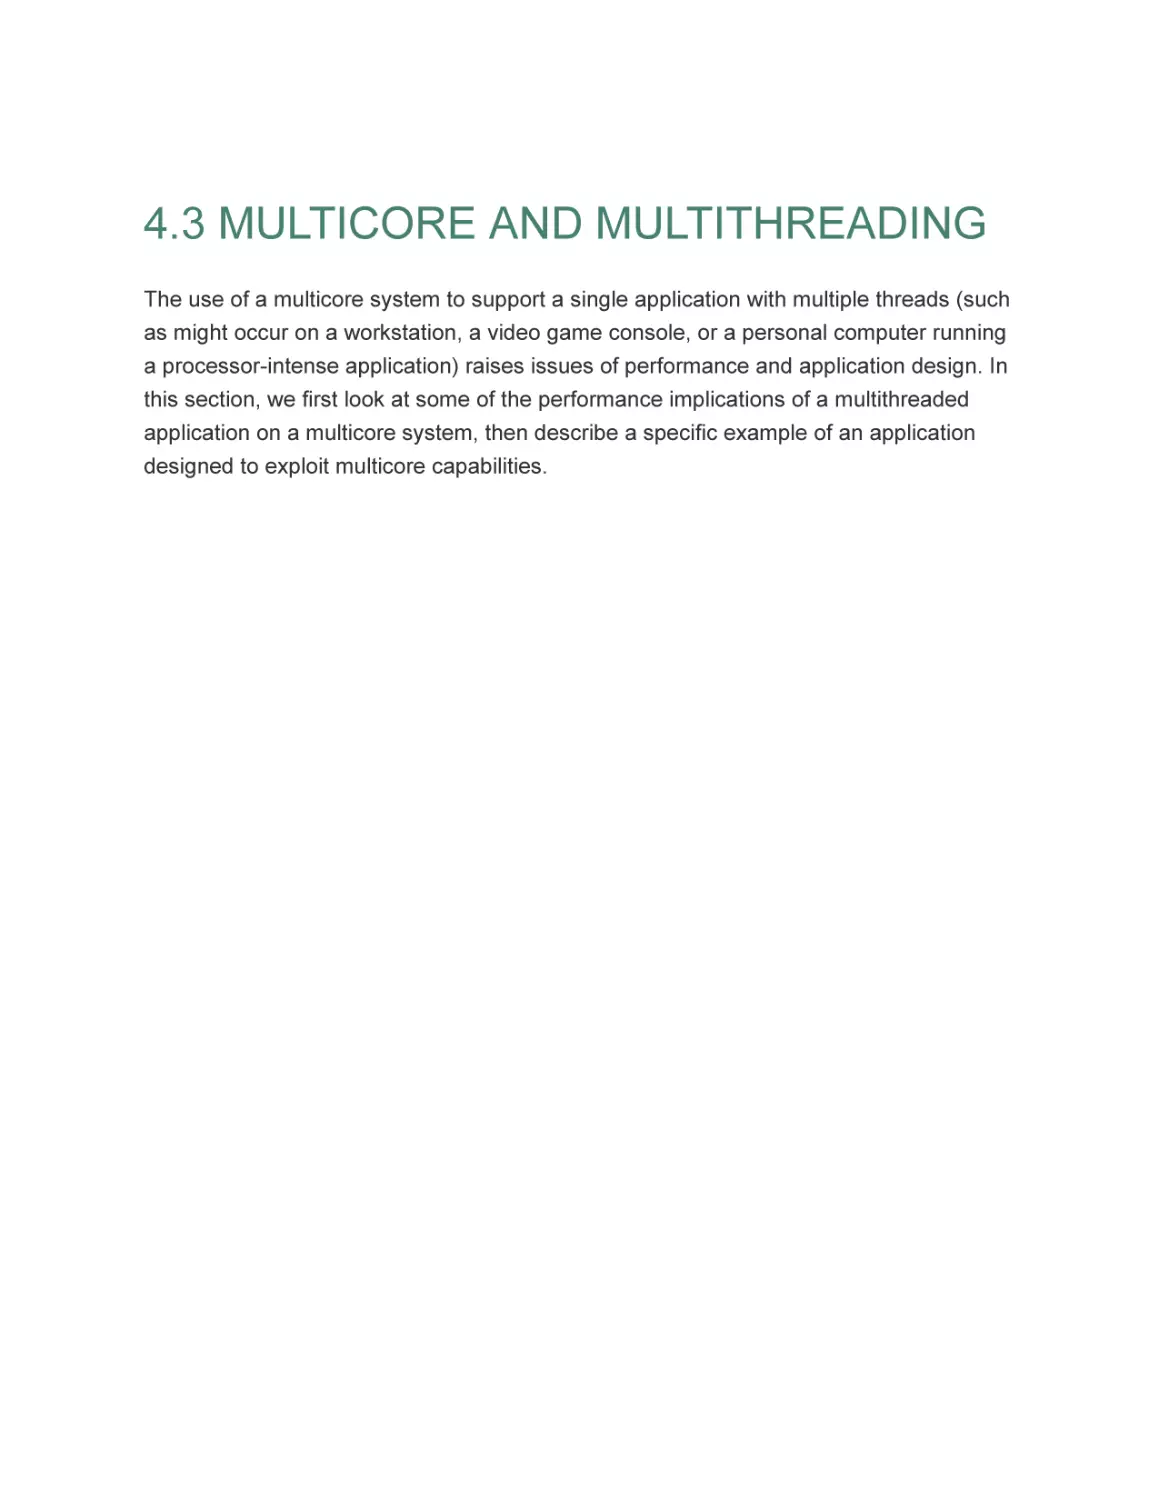 4.3 MULTICORE AND MULTITHREADING